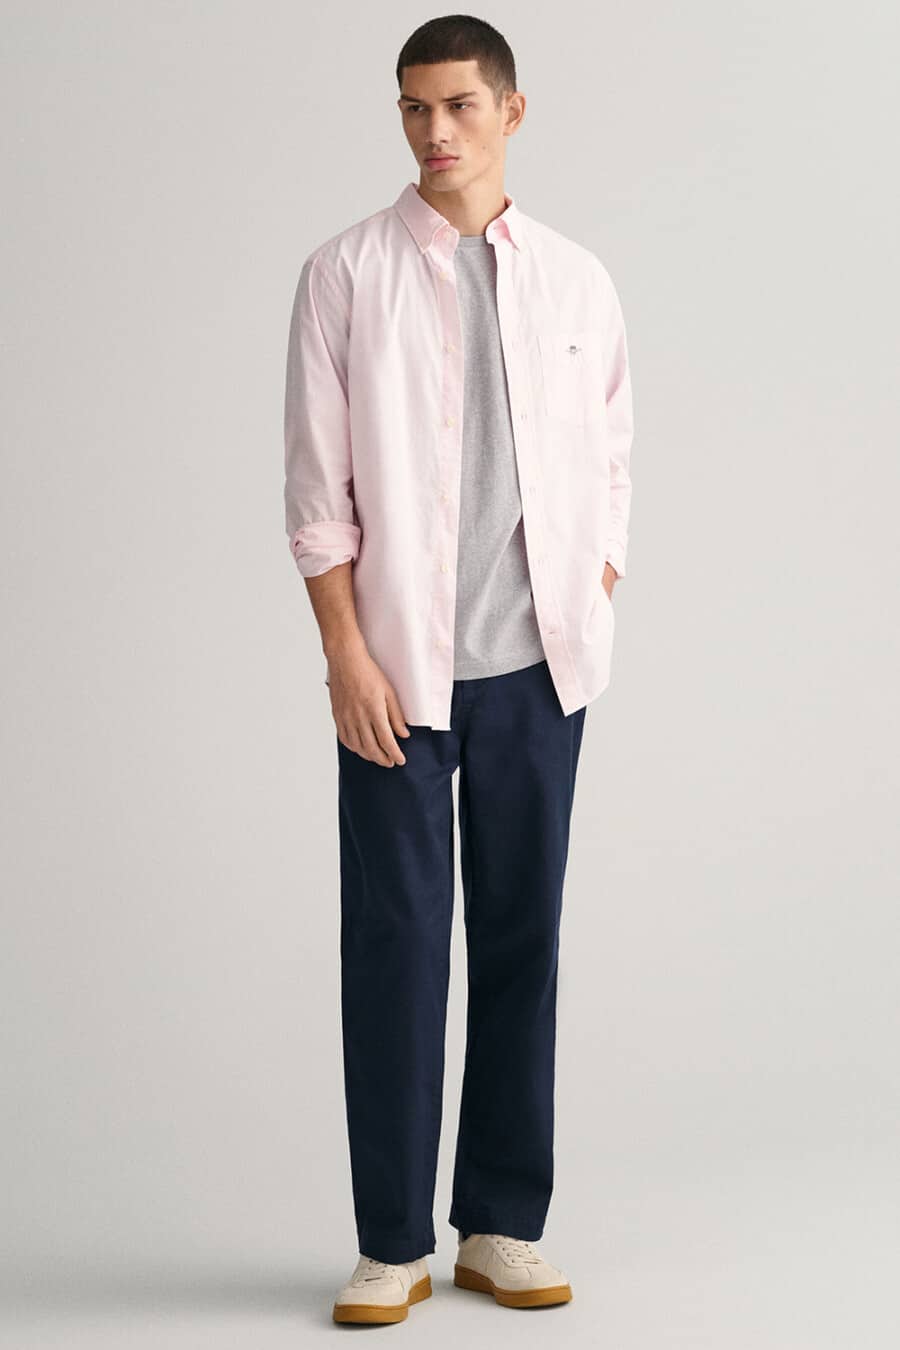 Men's navy chinos, grey T-shirt, open pink Oxford shirt and beige gum sole sneakers outfit